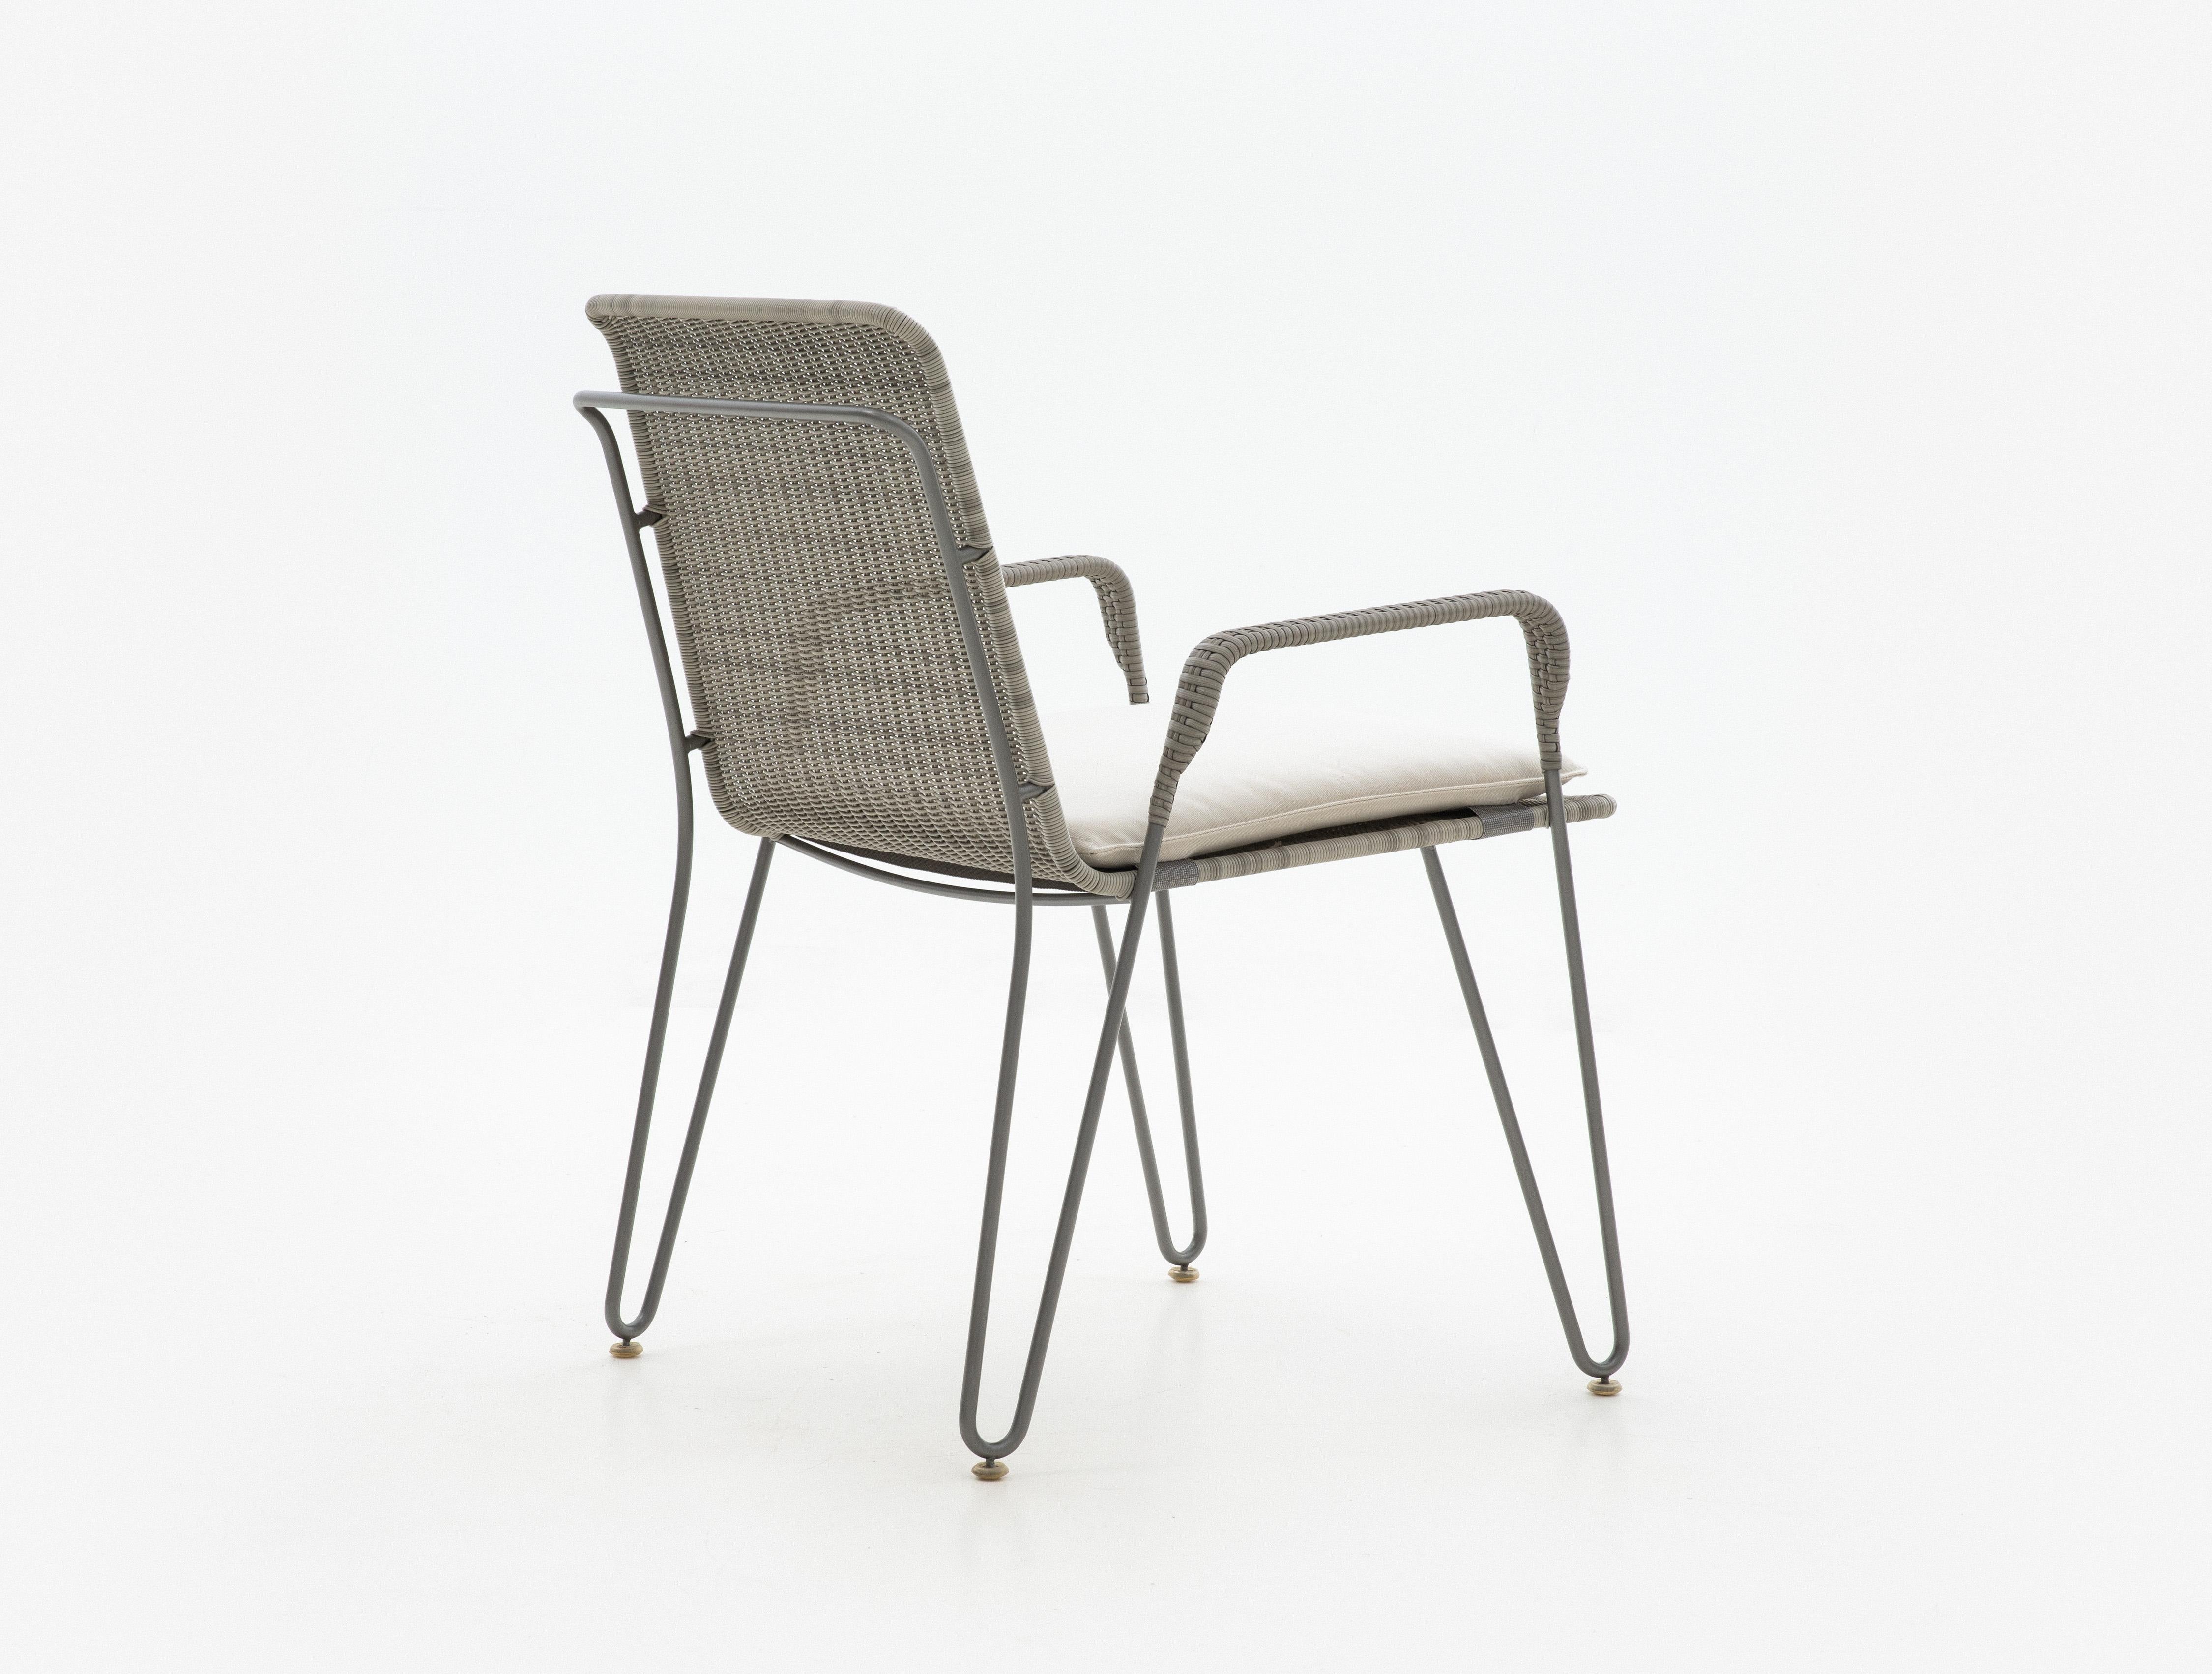 Modern HOLLY HUNT Outdoor Pelican Dining Chair with Oyster Base Finish